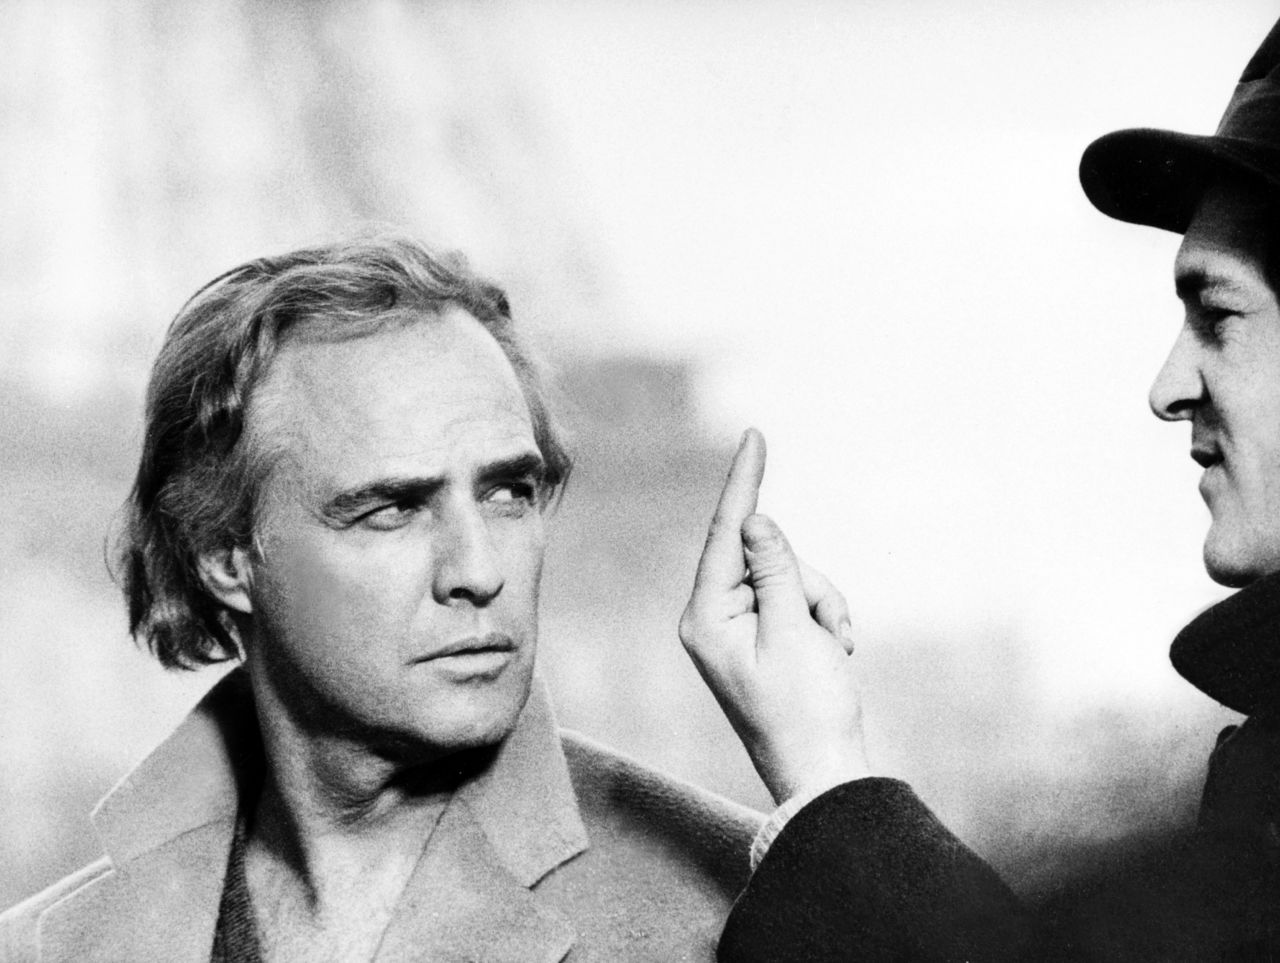 Brando on the set of 'Last Tango in Paris' (1972) with Bernardo Bertolucci. The director drew out a performance from the actor that came uncomfortably close to real life, and led to friction between the two.